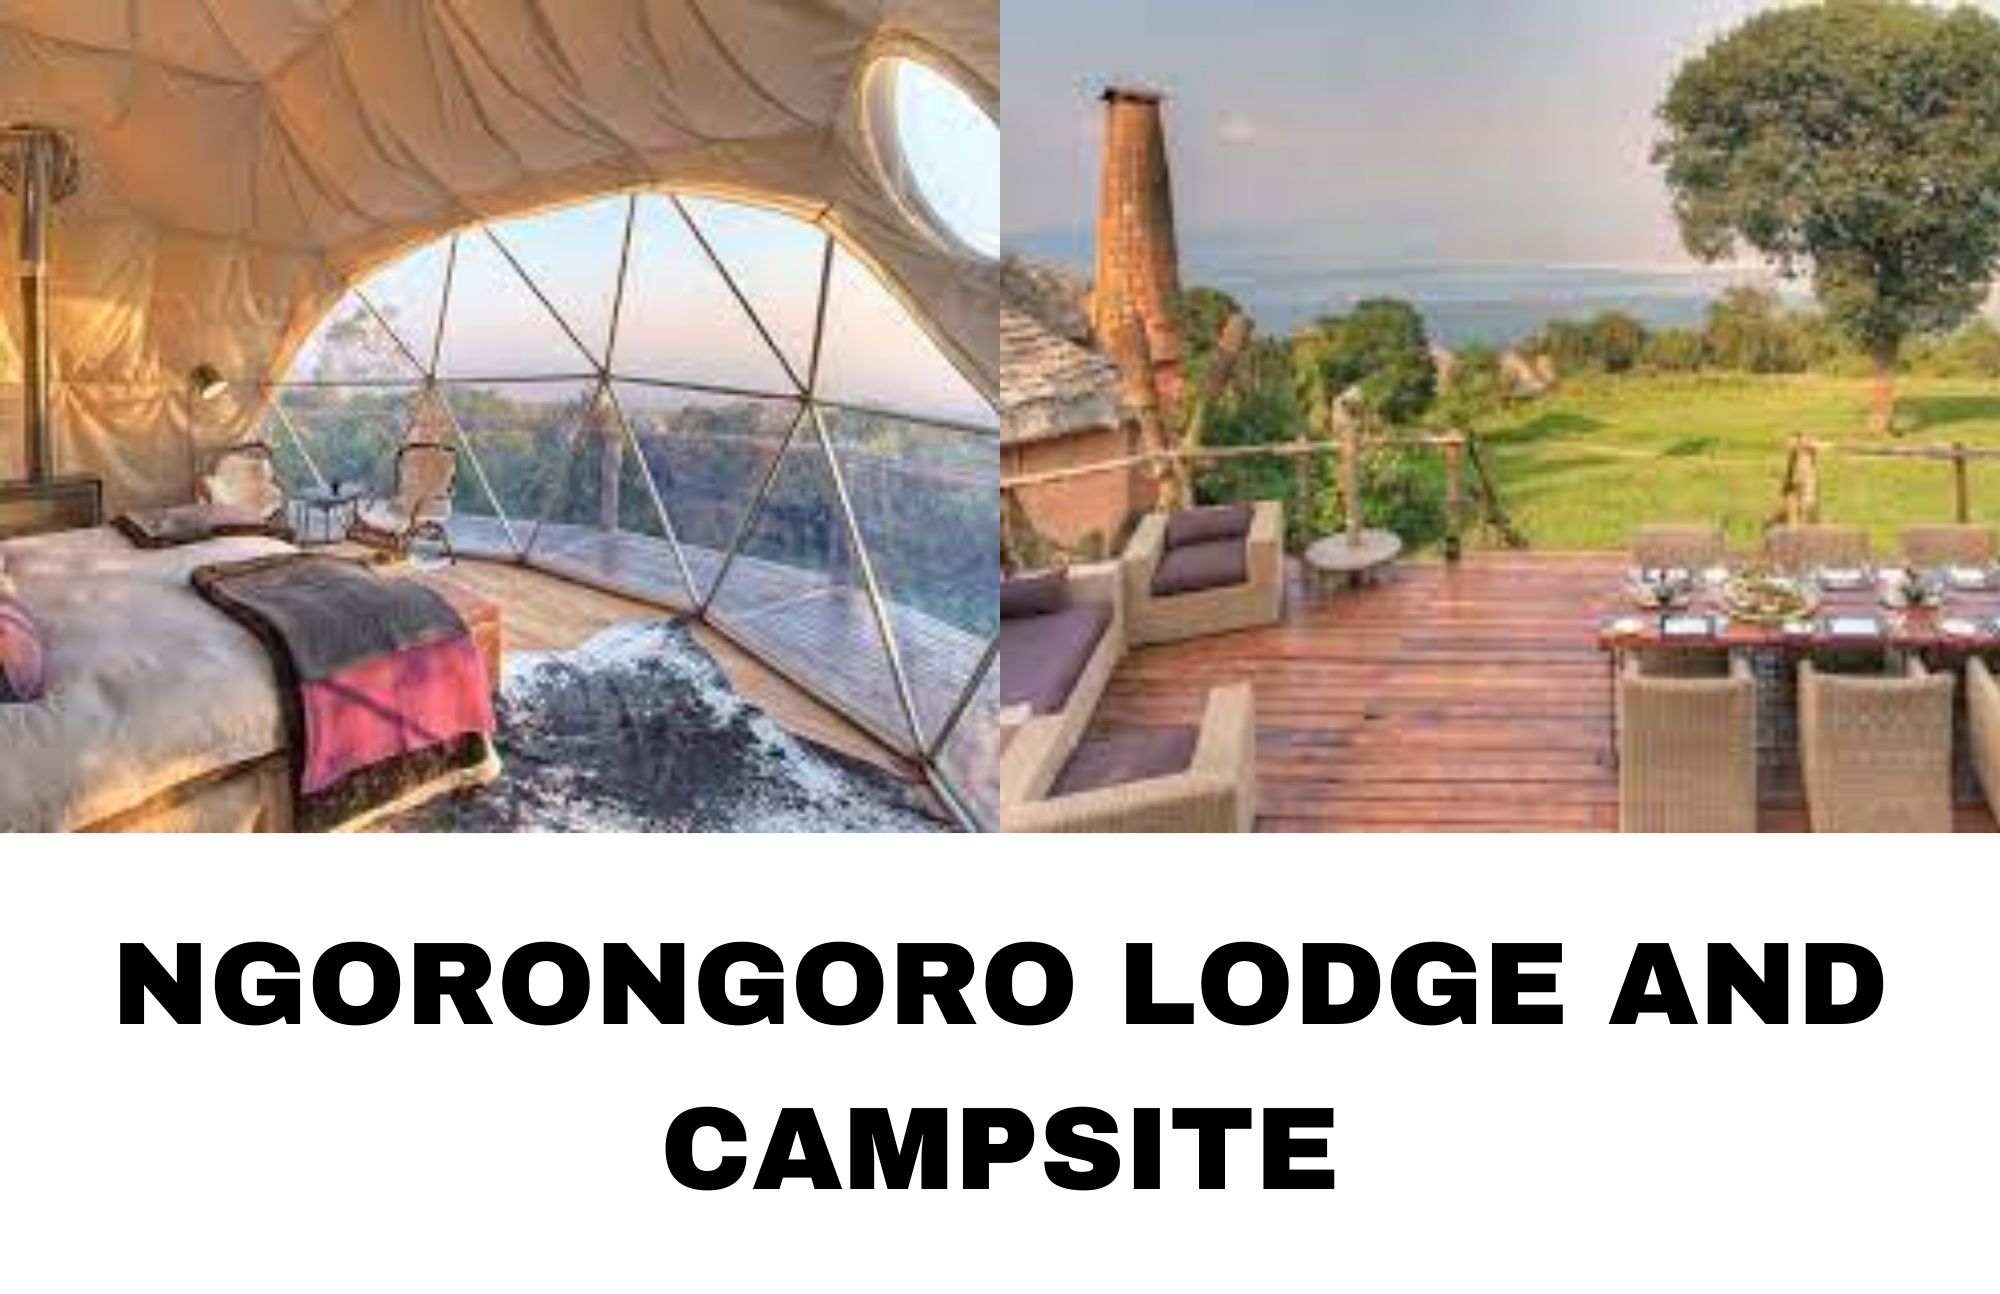 On the left is a picture of the Ngorongoro campsite, and on the right is a picture of the Ngorongoro Lodge